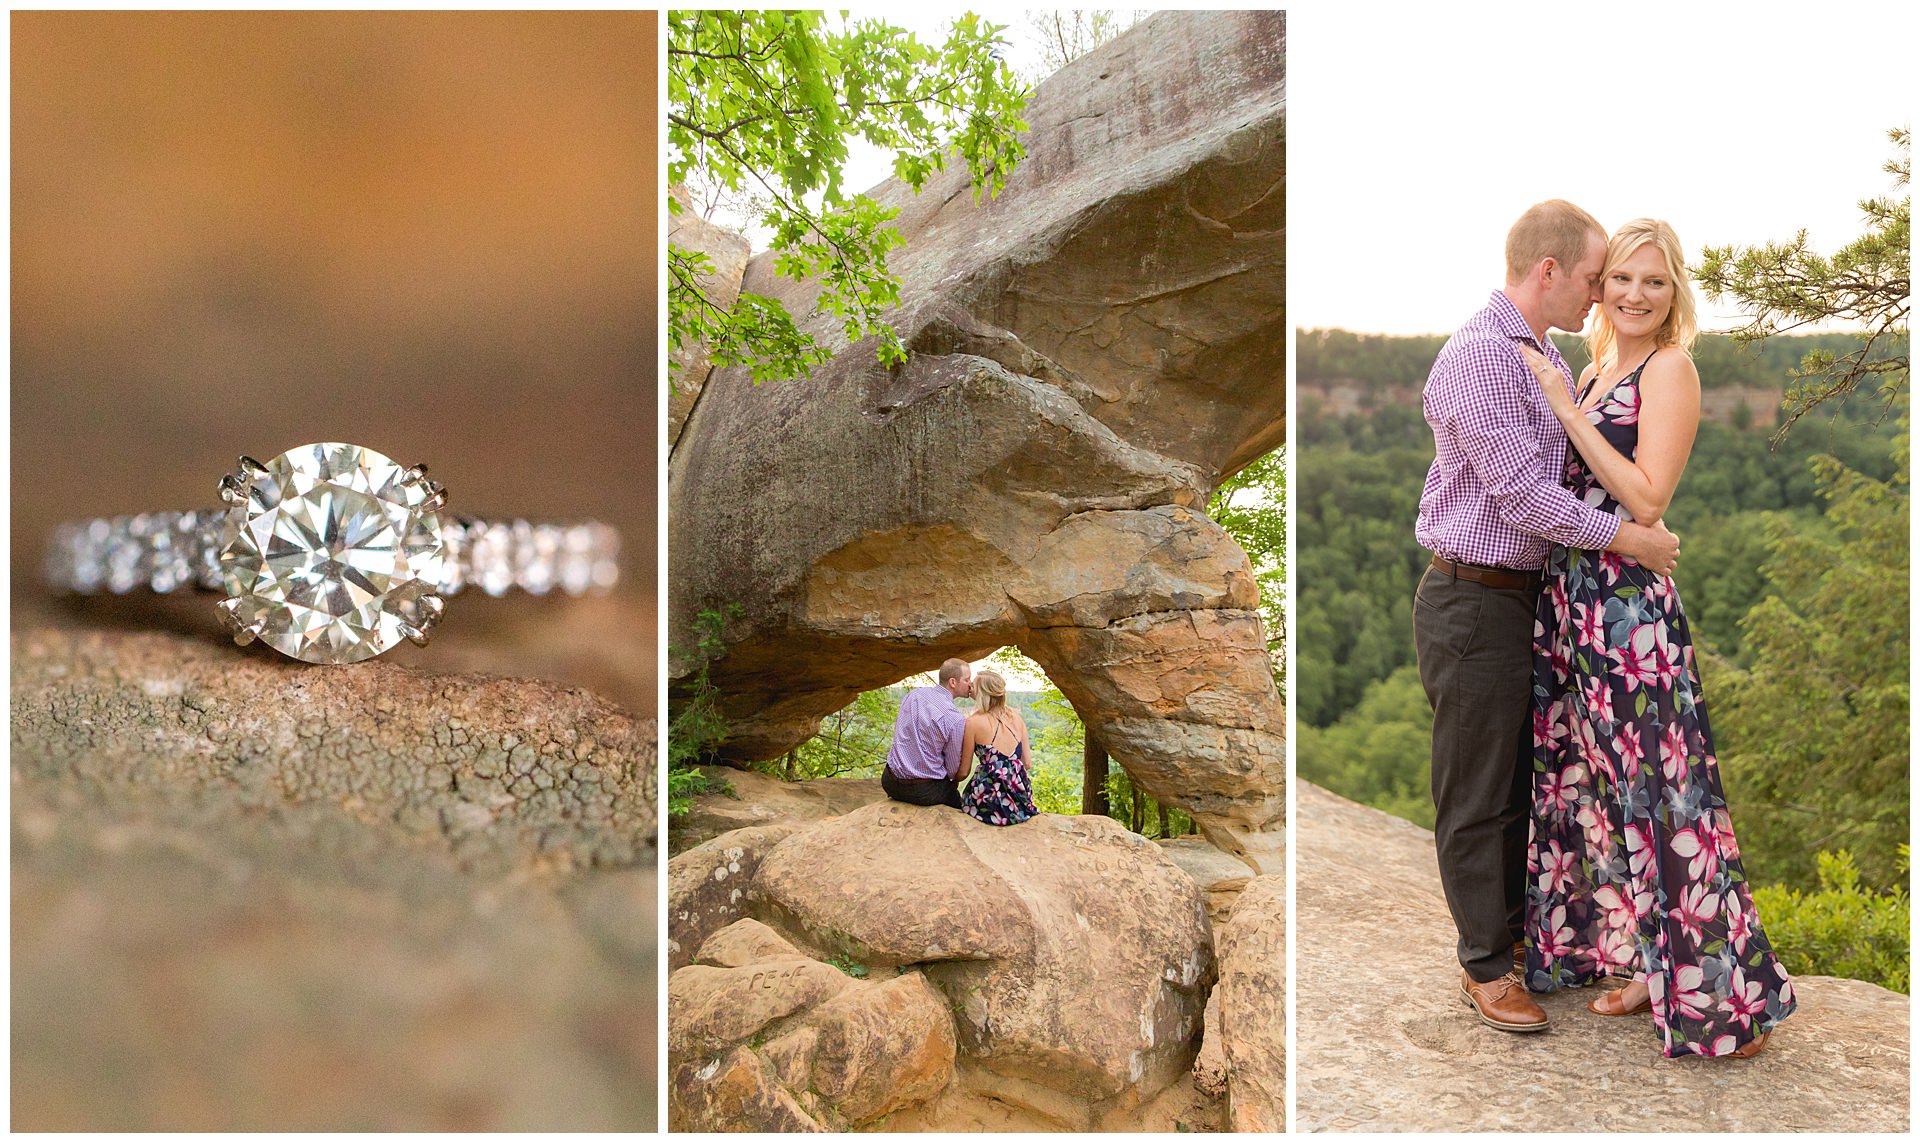 Summer Red River Gorge Engagement Session at Sky Bridge Arch.